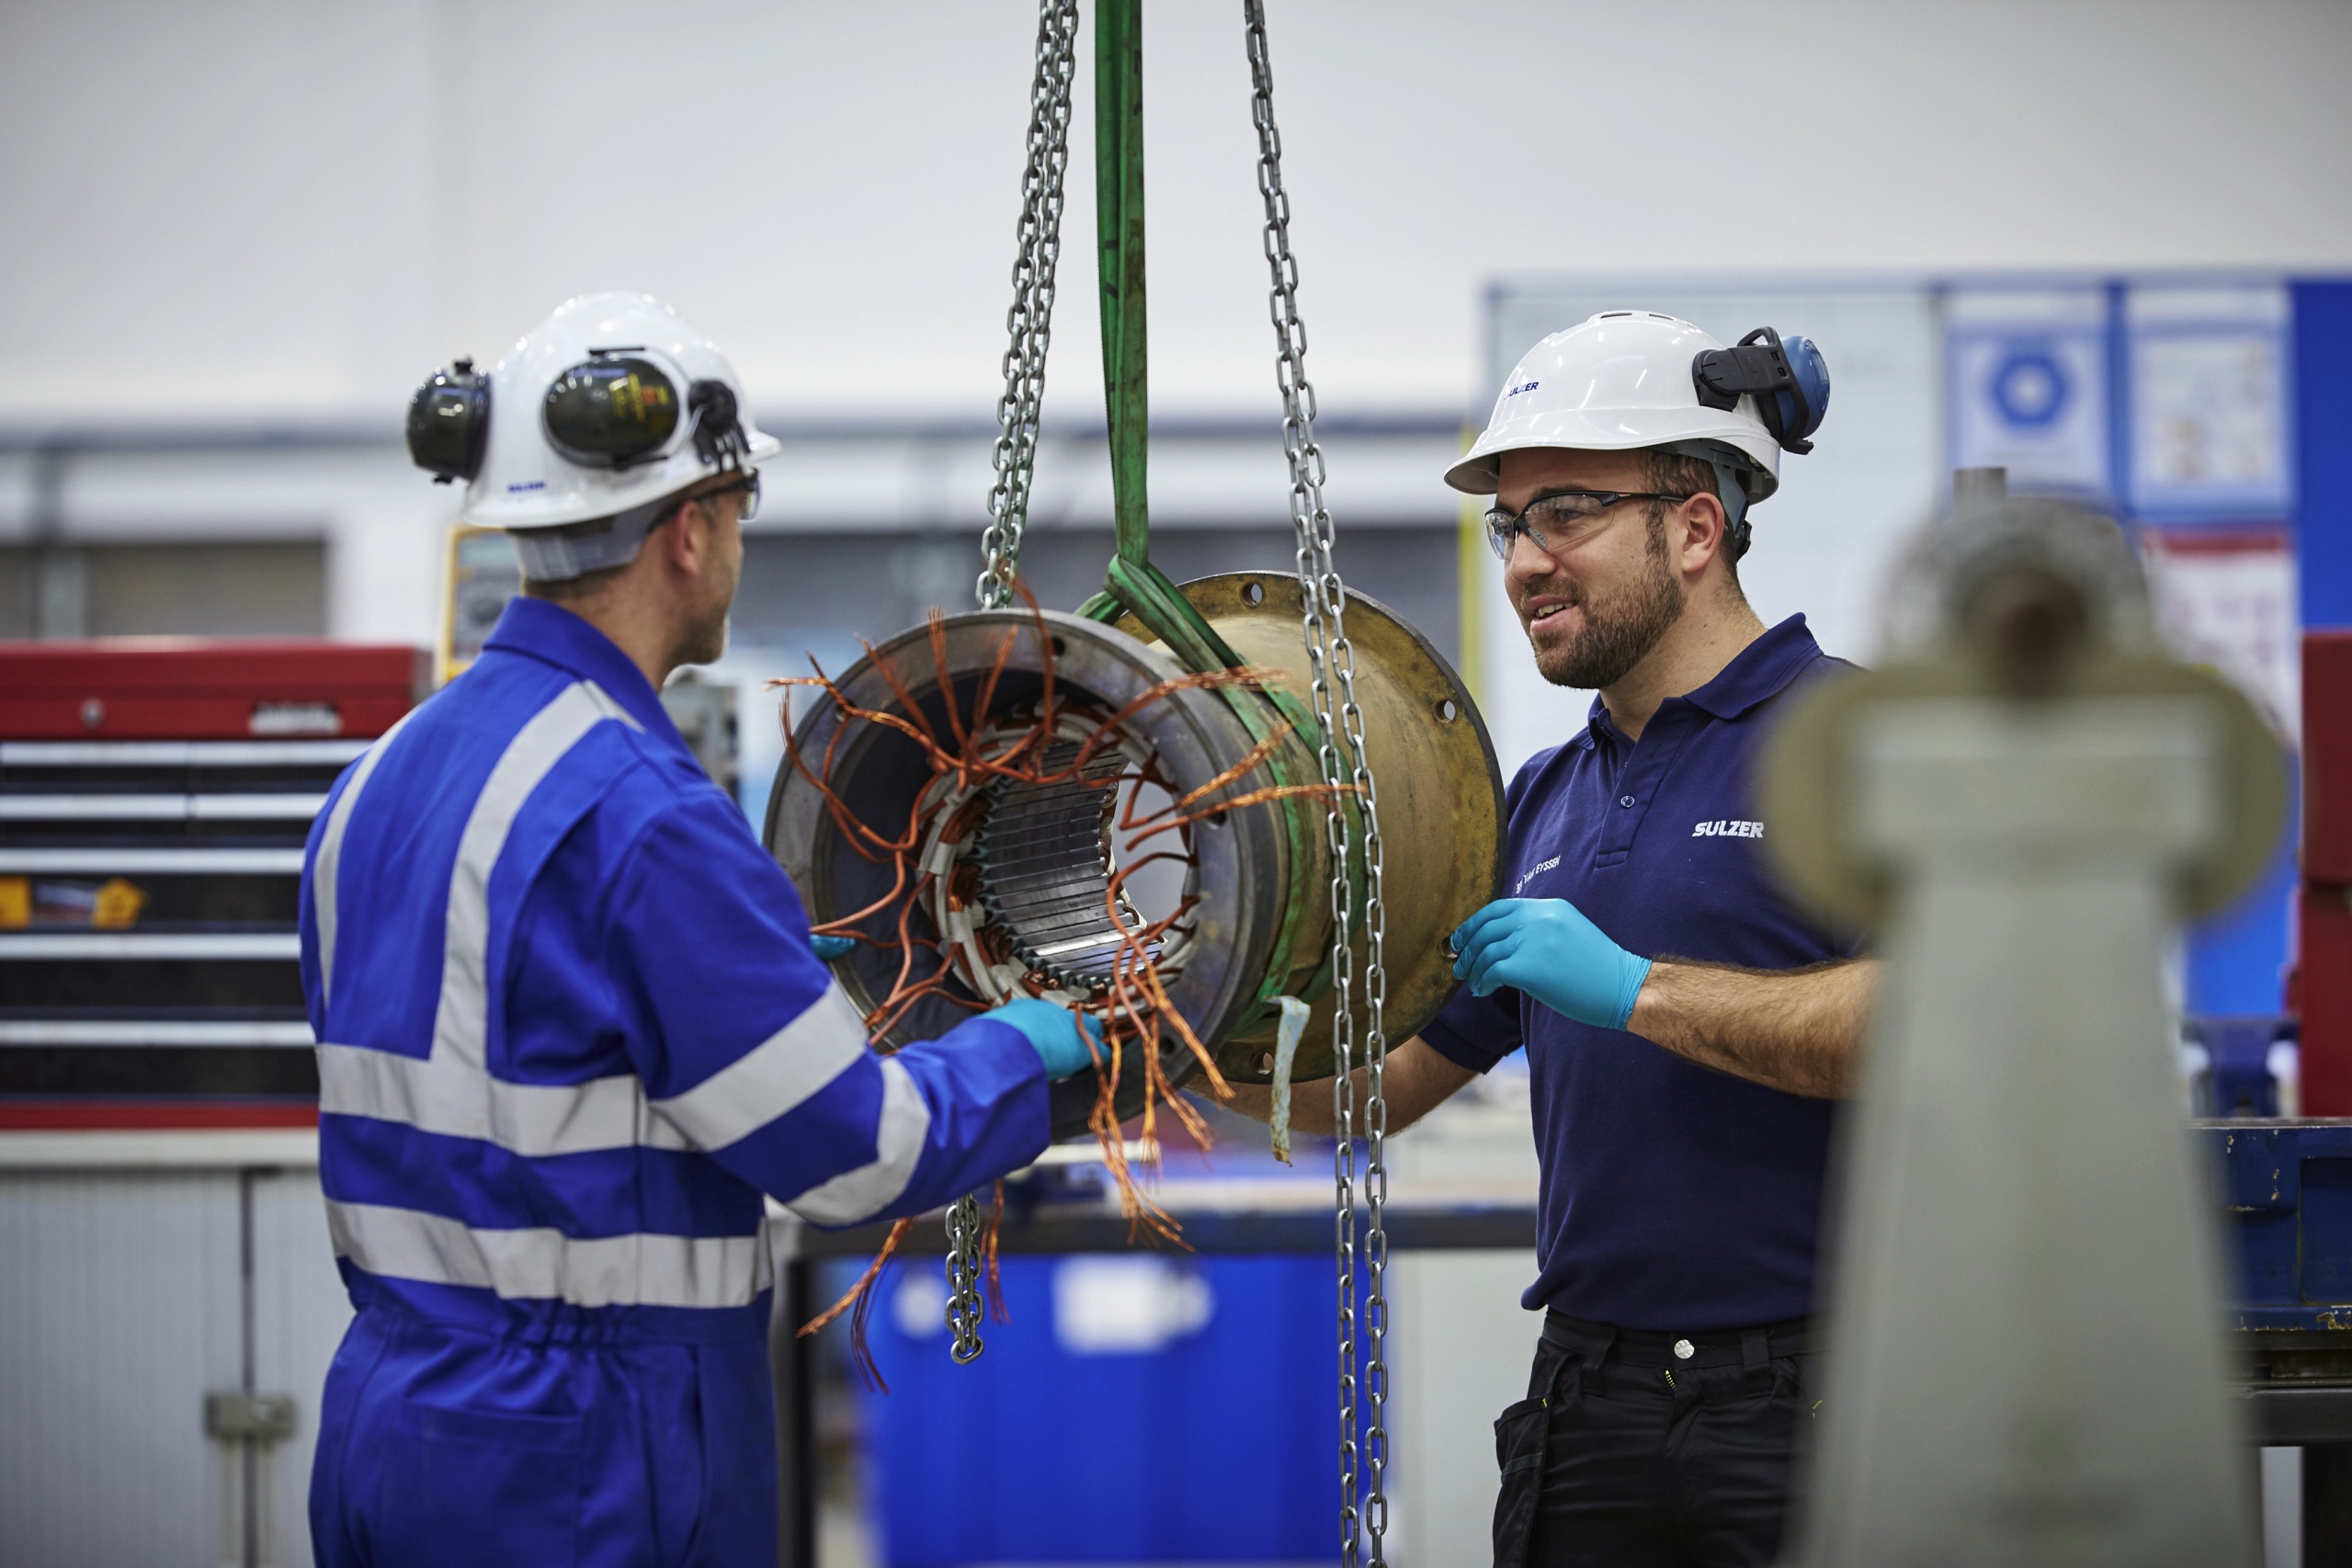 Sulzer offers a wide range of repair services through its worldwide network of service centres.